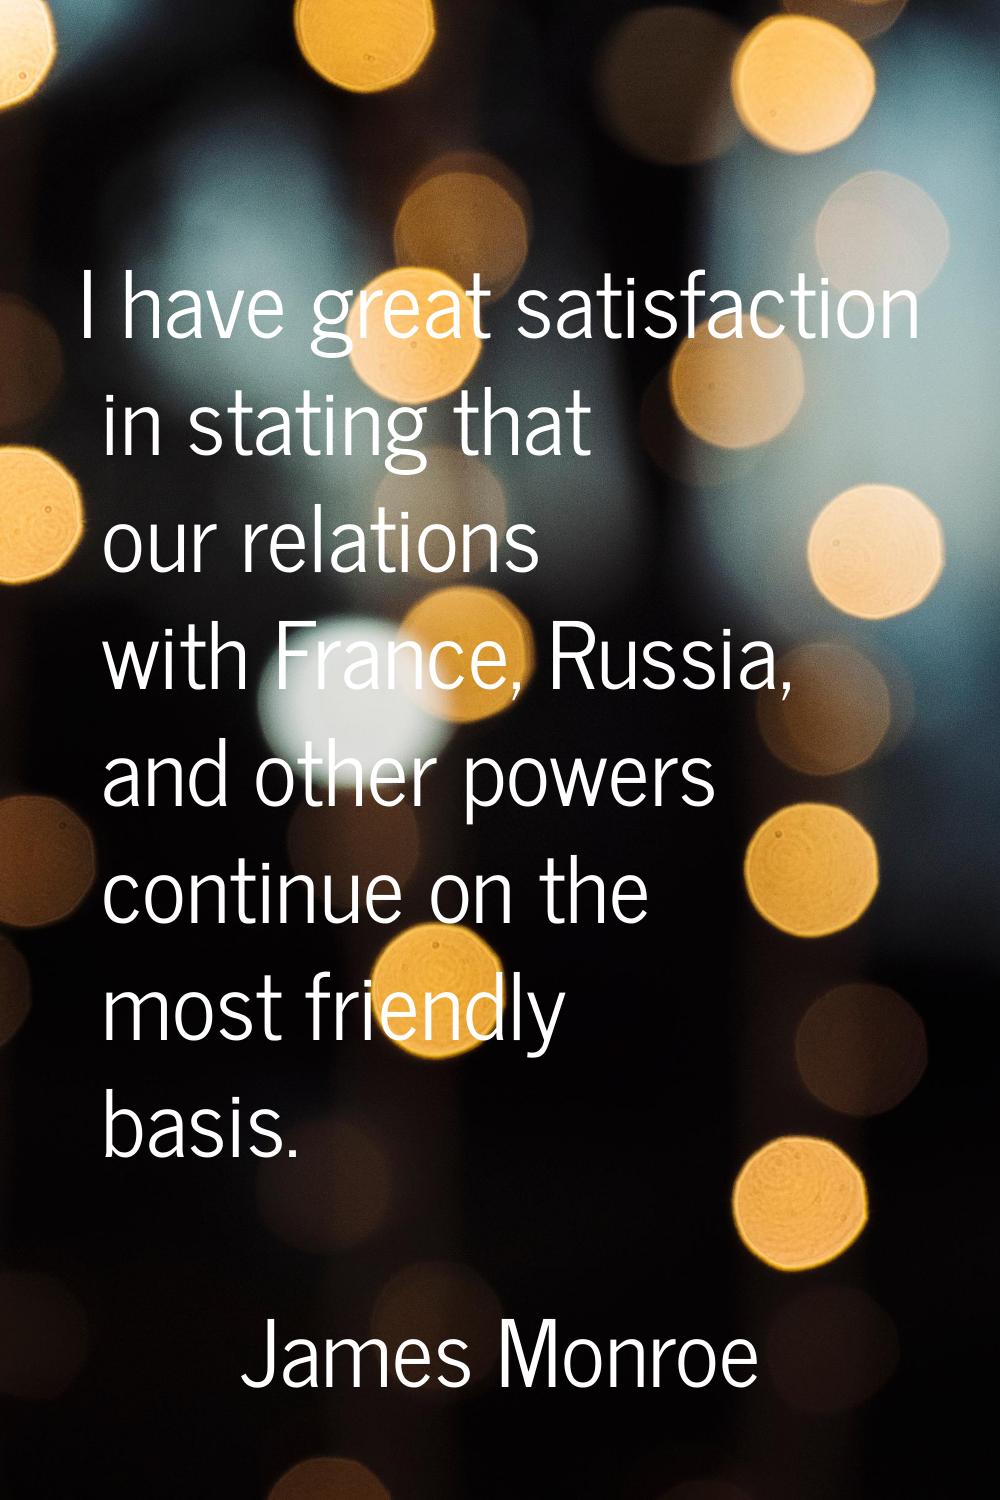 I have great satisfaction in stating that our relations with France, Russia, and other powers conti